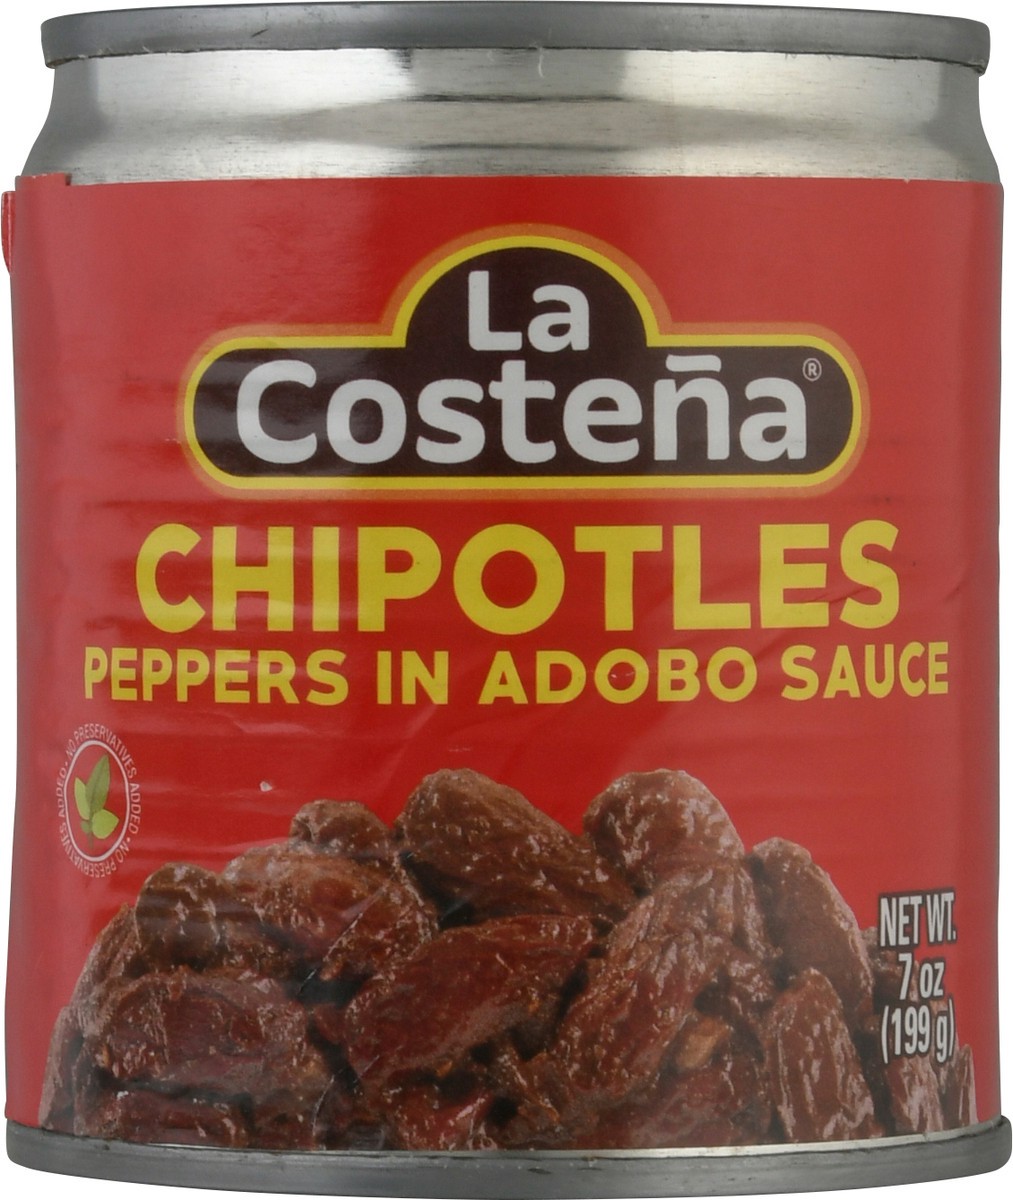 slide 9 of 12, La Costeña Chipotle Peppers in Adobo Sauce, 7 oz